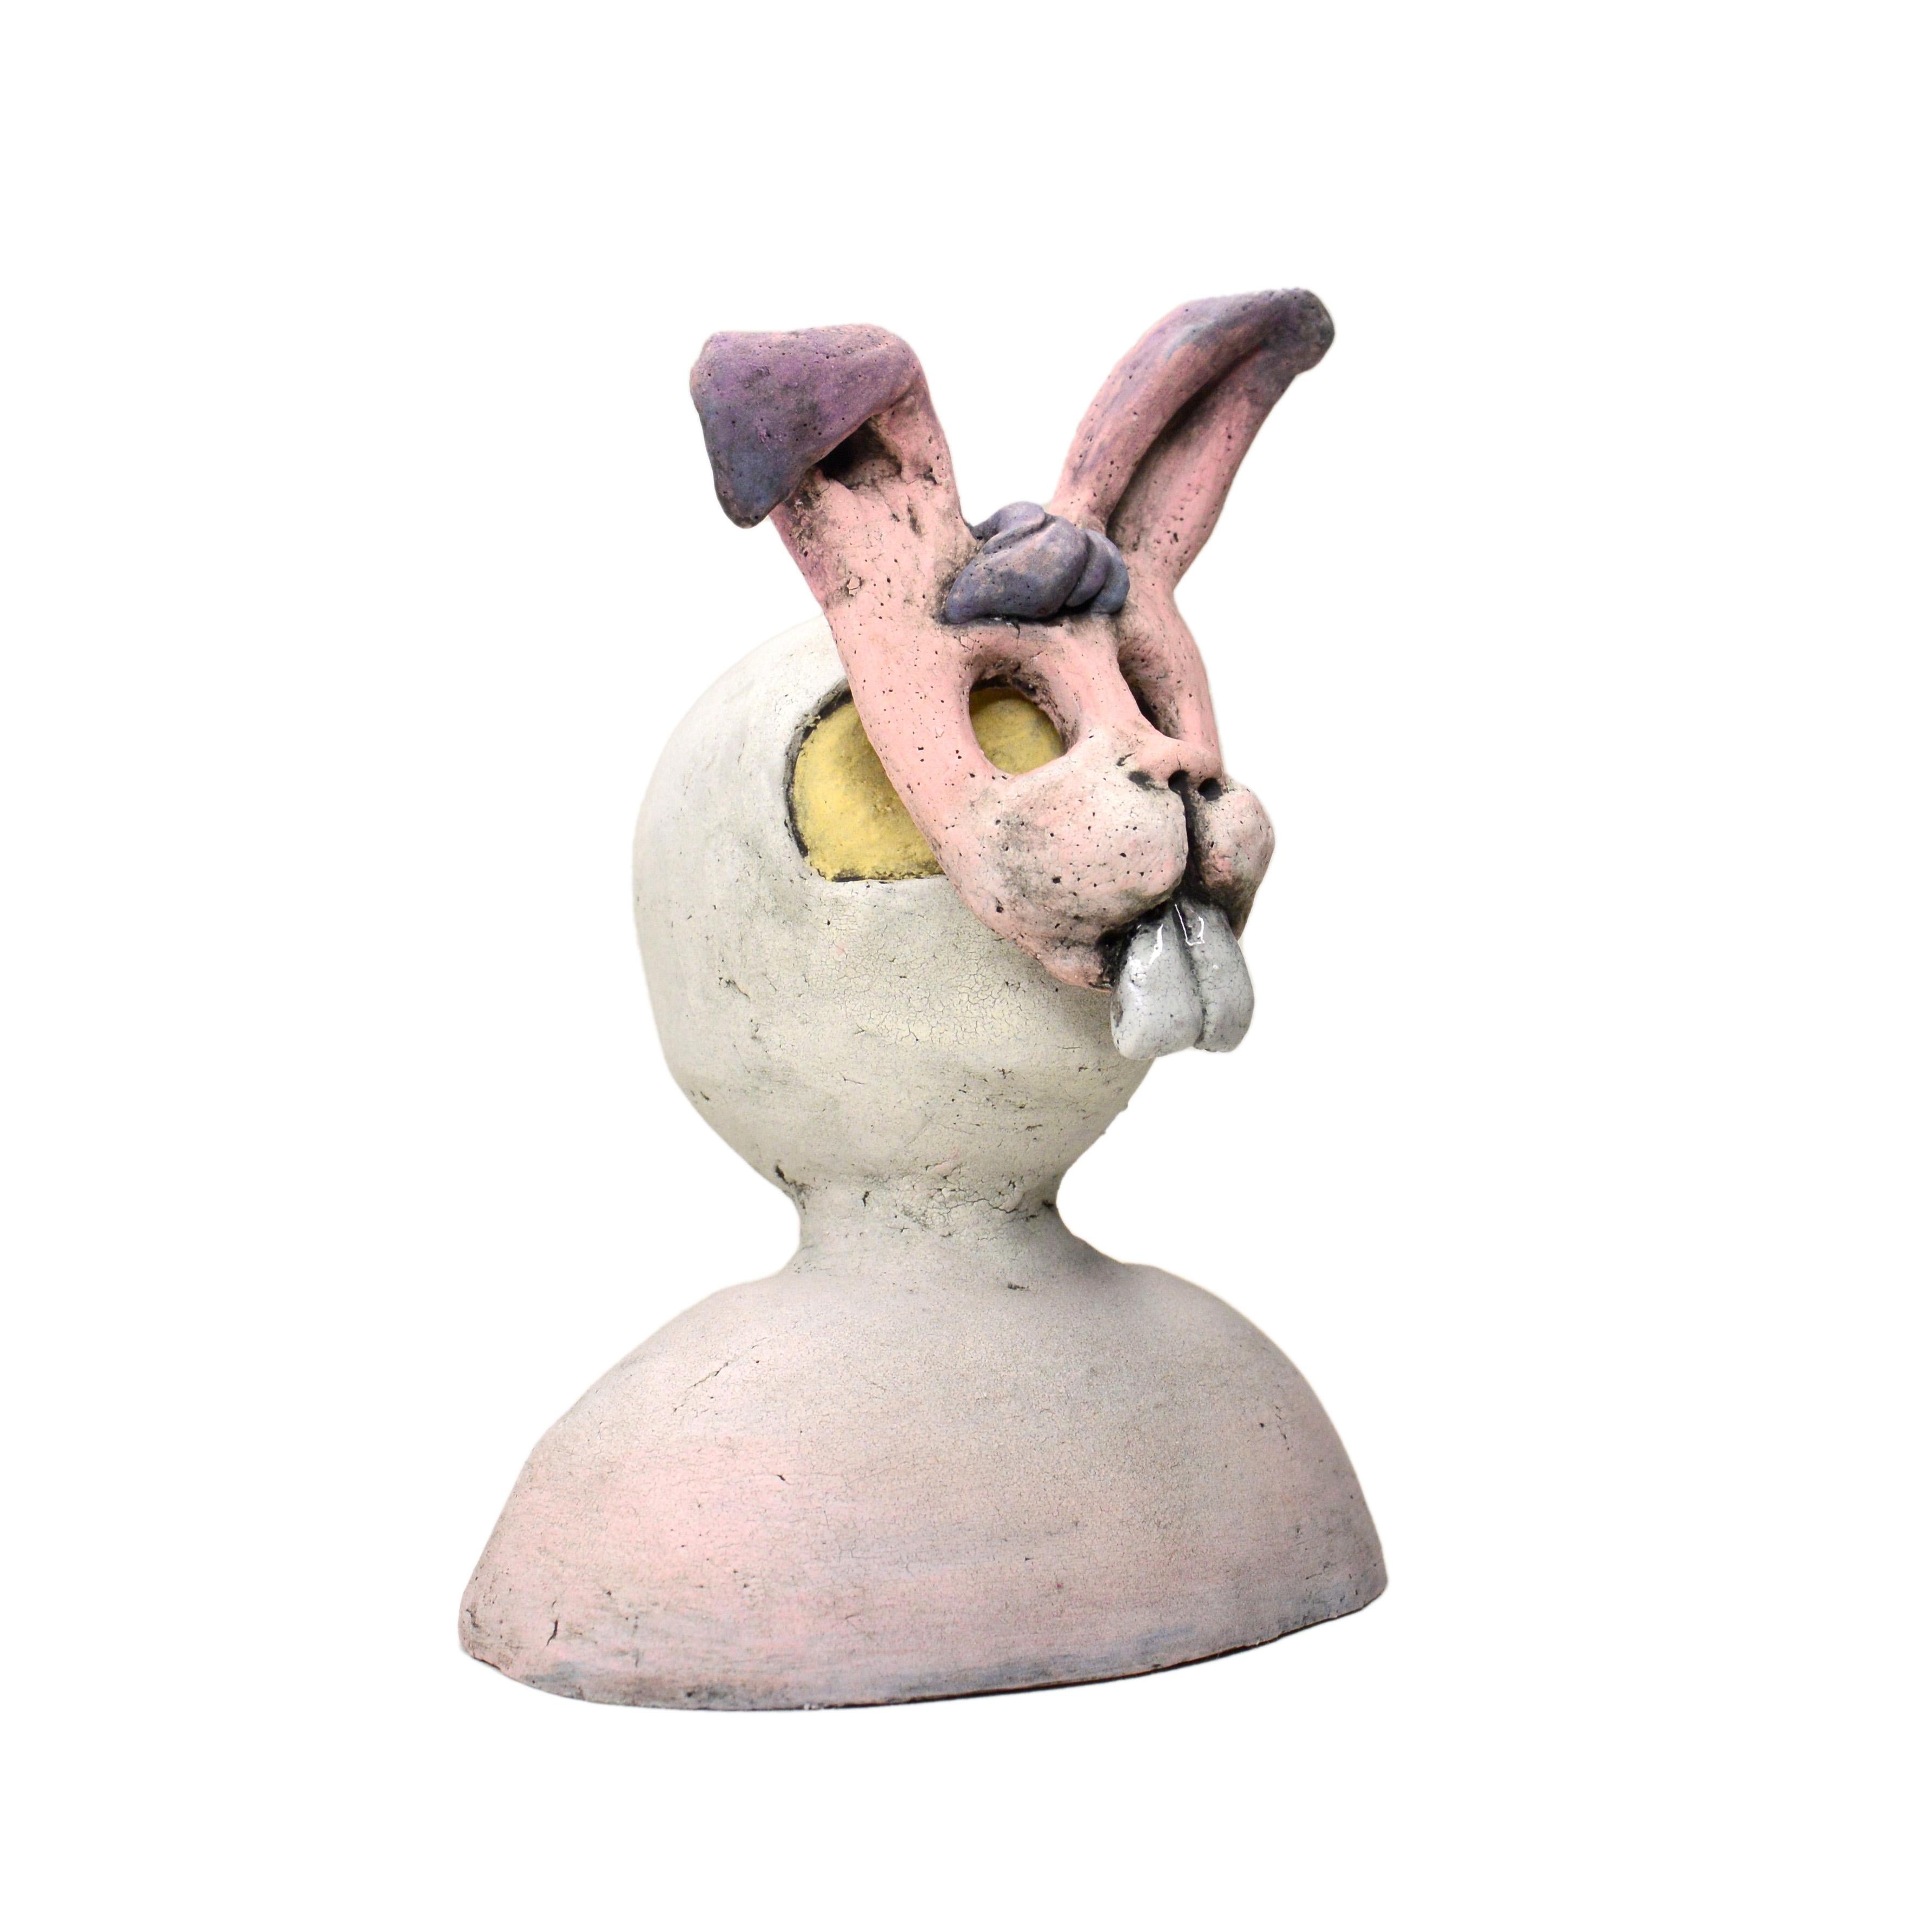 Pin·e·co 008 Ceramic Sculpture with a bunny mask fertility, luck, and creativity - Beige Figurative Sculpture by Renate Frotscher